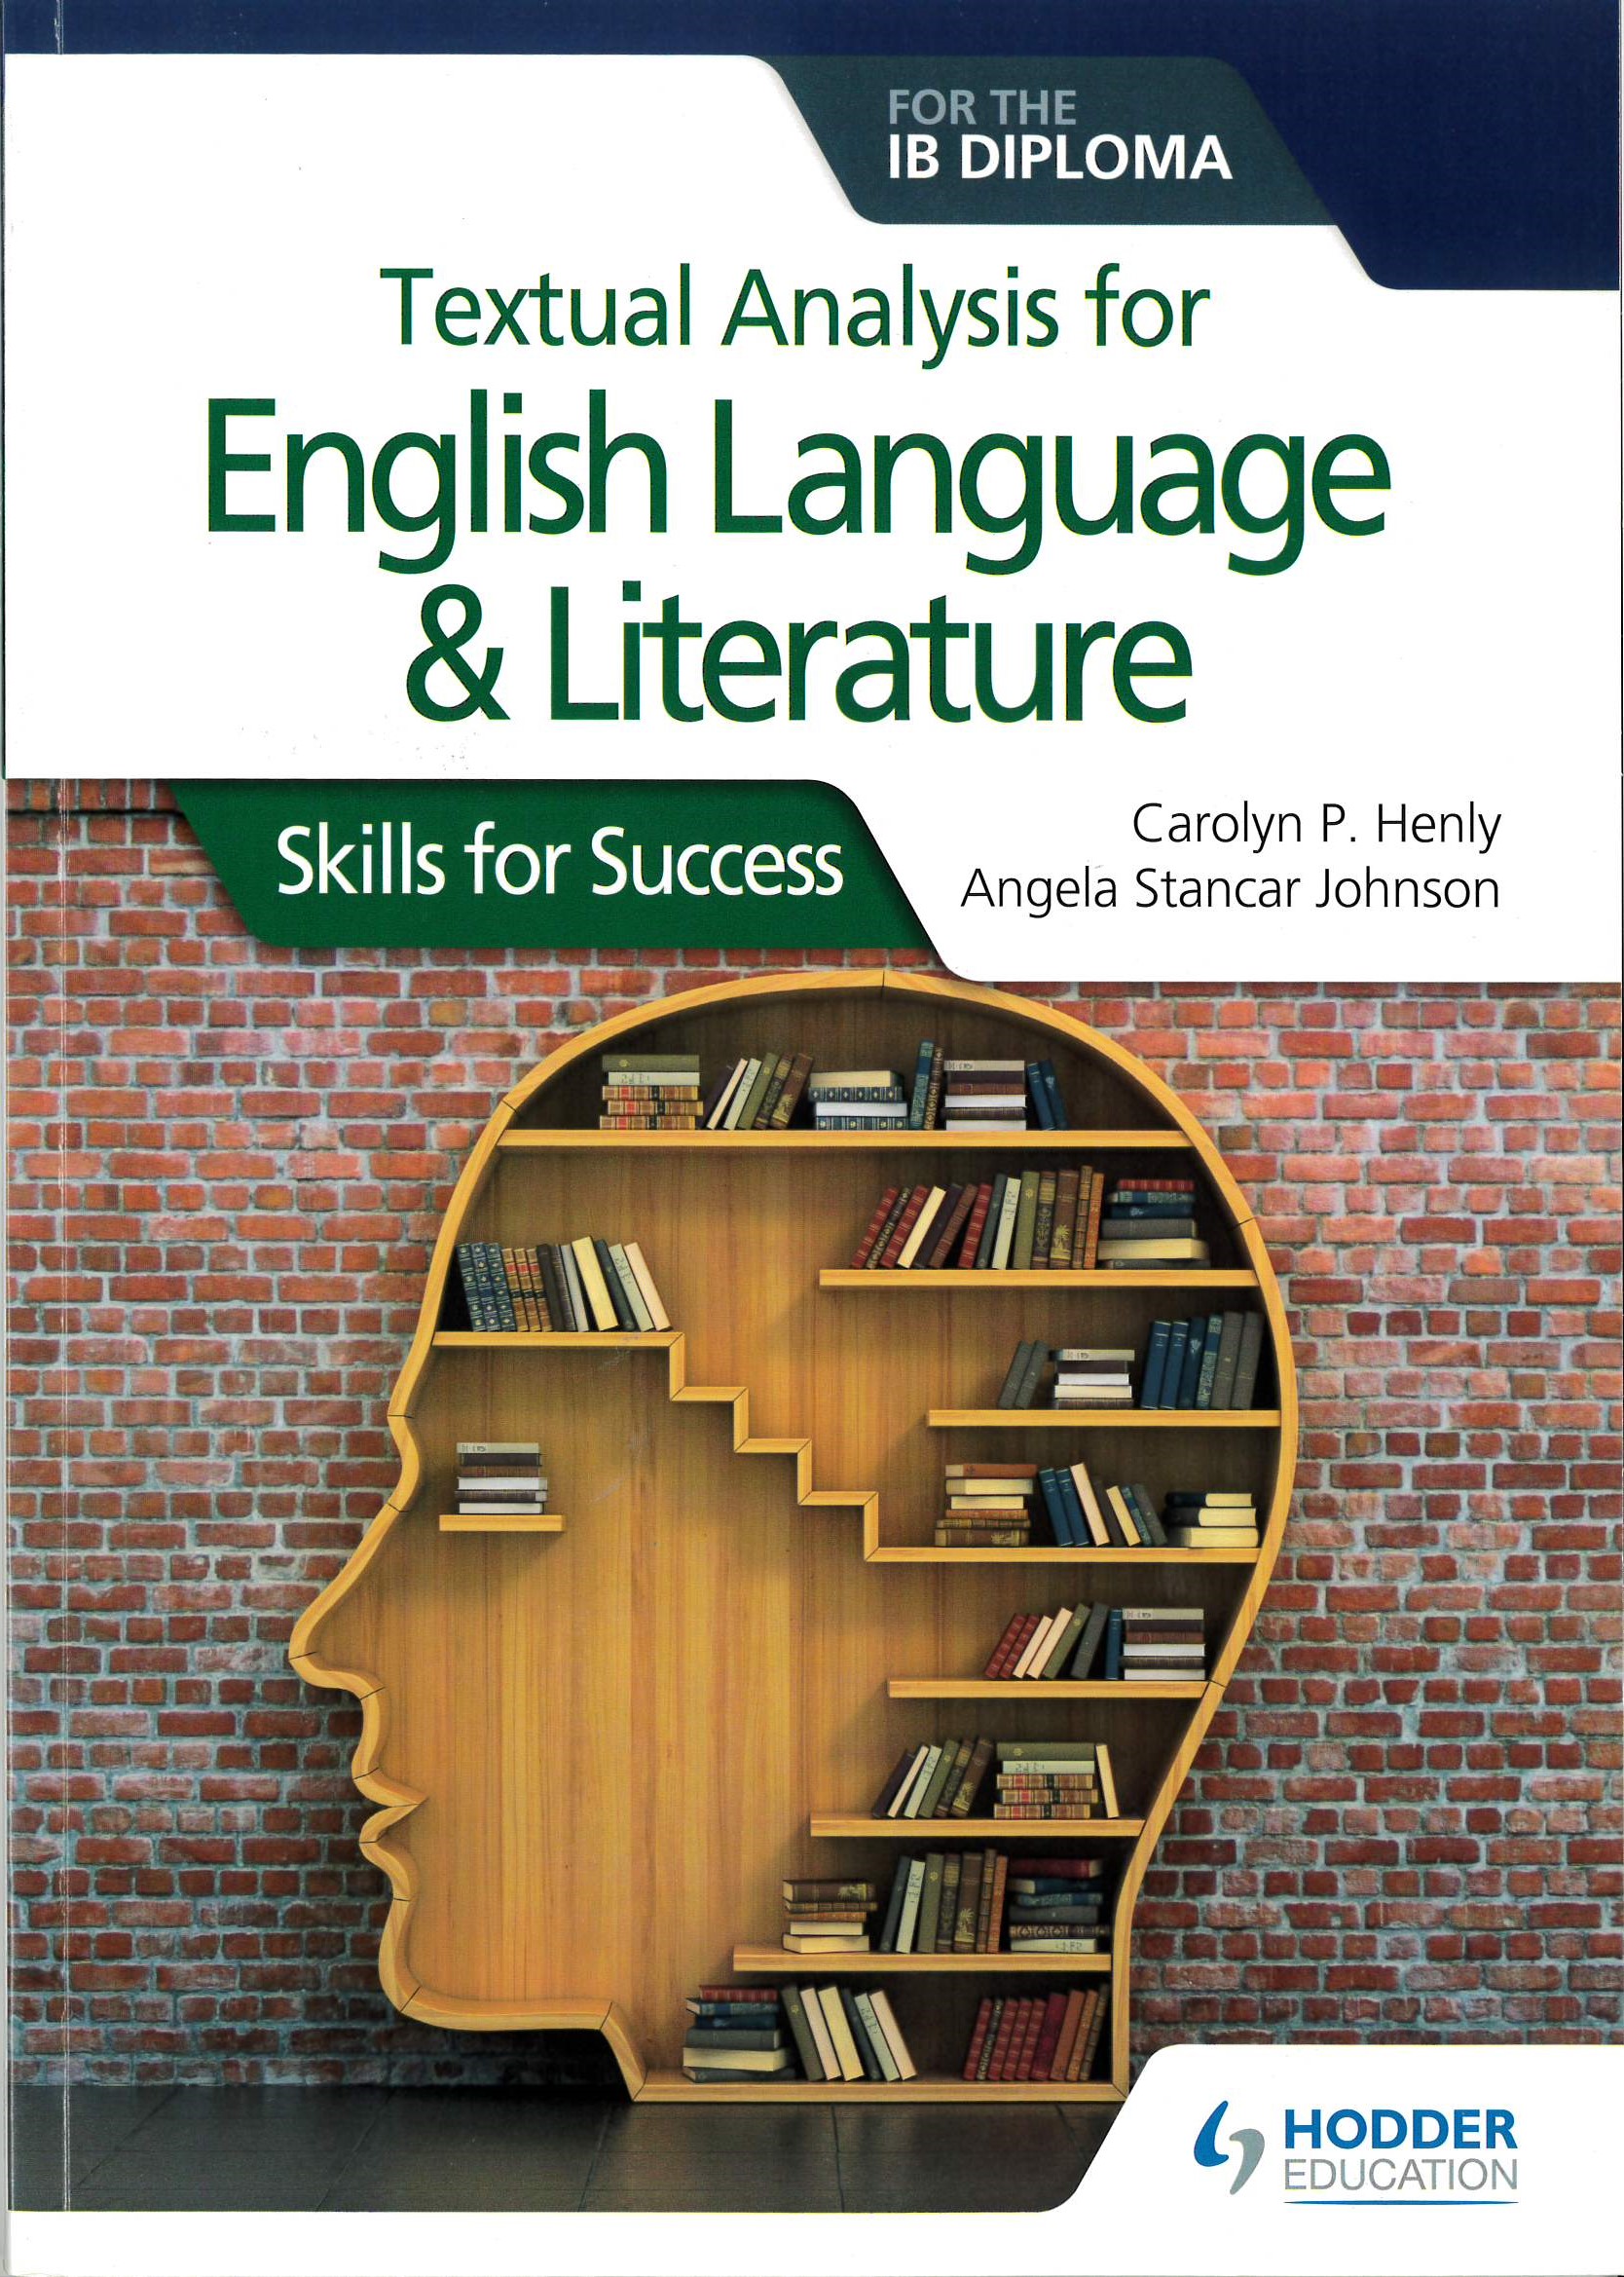 Textual analysis for English language and literature for the IB diploma : skills for success